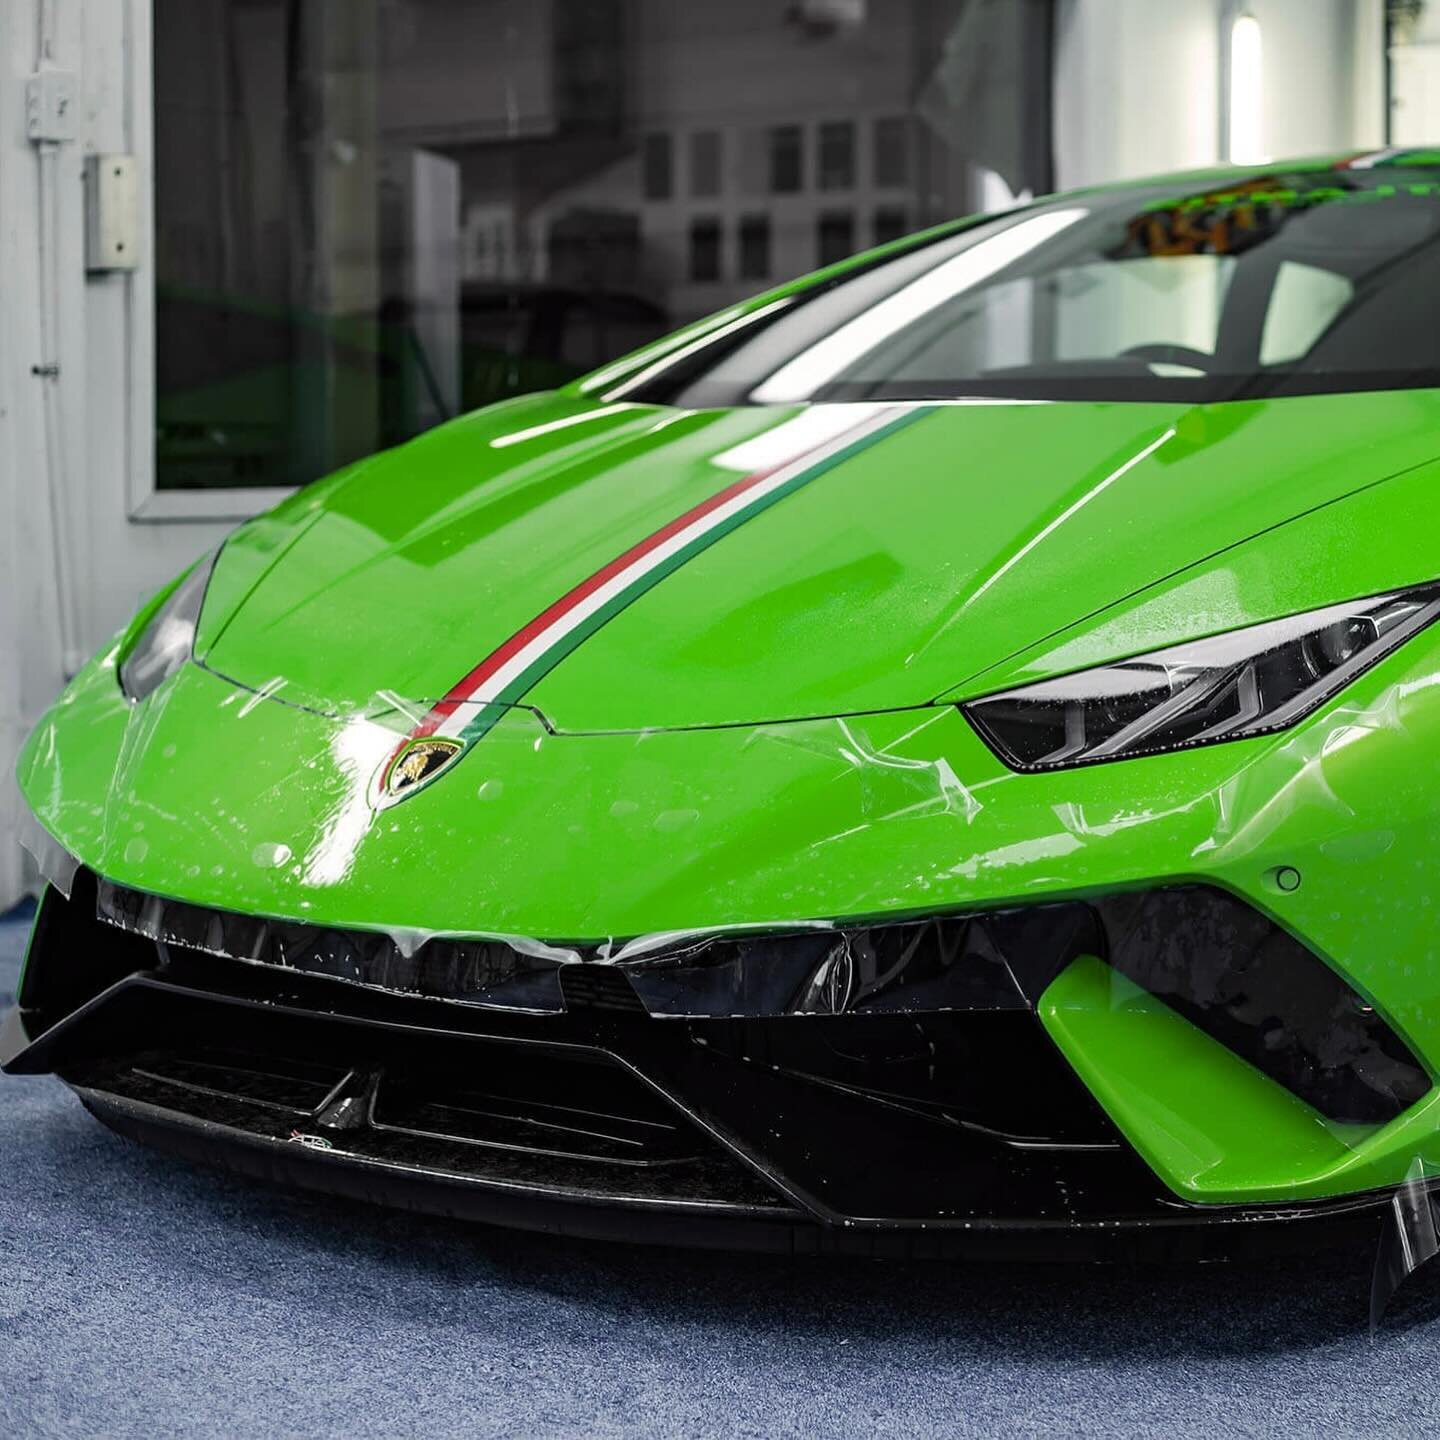 Finishing off 2023 with this stunning Lamborghini Huracan Performante in Verde Mantis. In for our Front End PPF. 

📍Collingwood, Melbourne 🇦🇺

#melbourne #paintprotectionfilm #ppf #paintprotection #ceramiccoating #xpel #suntek